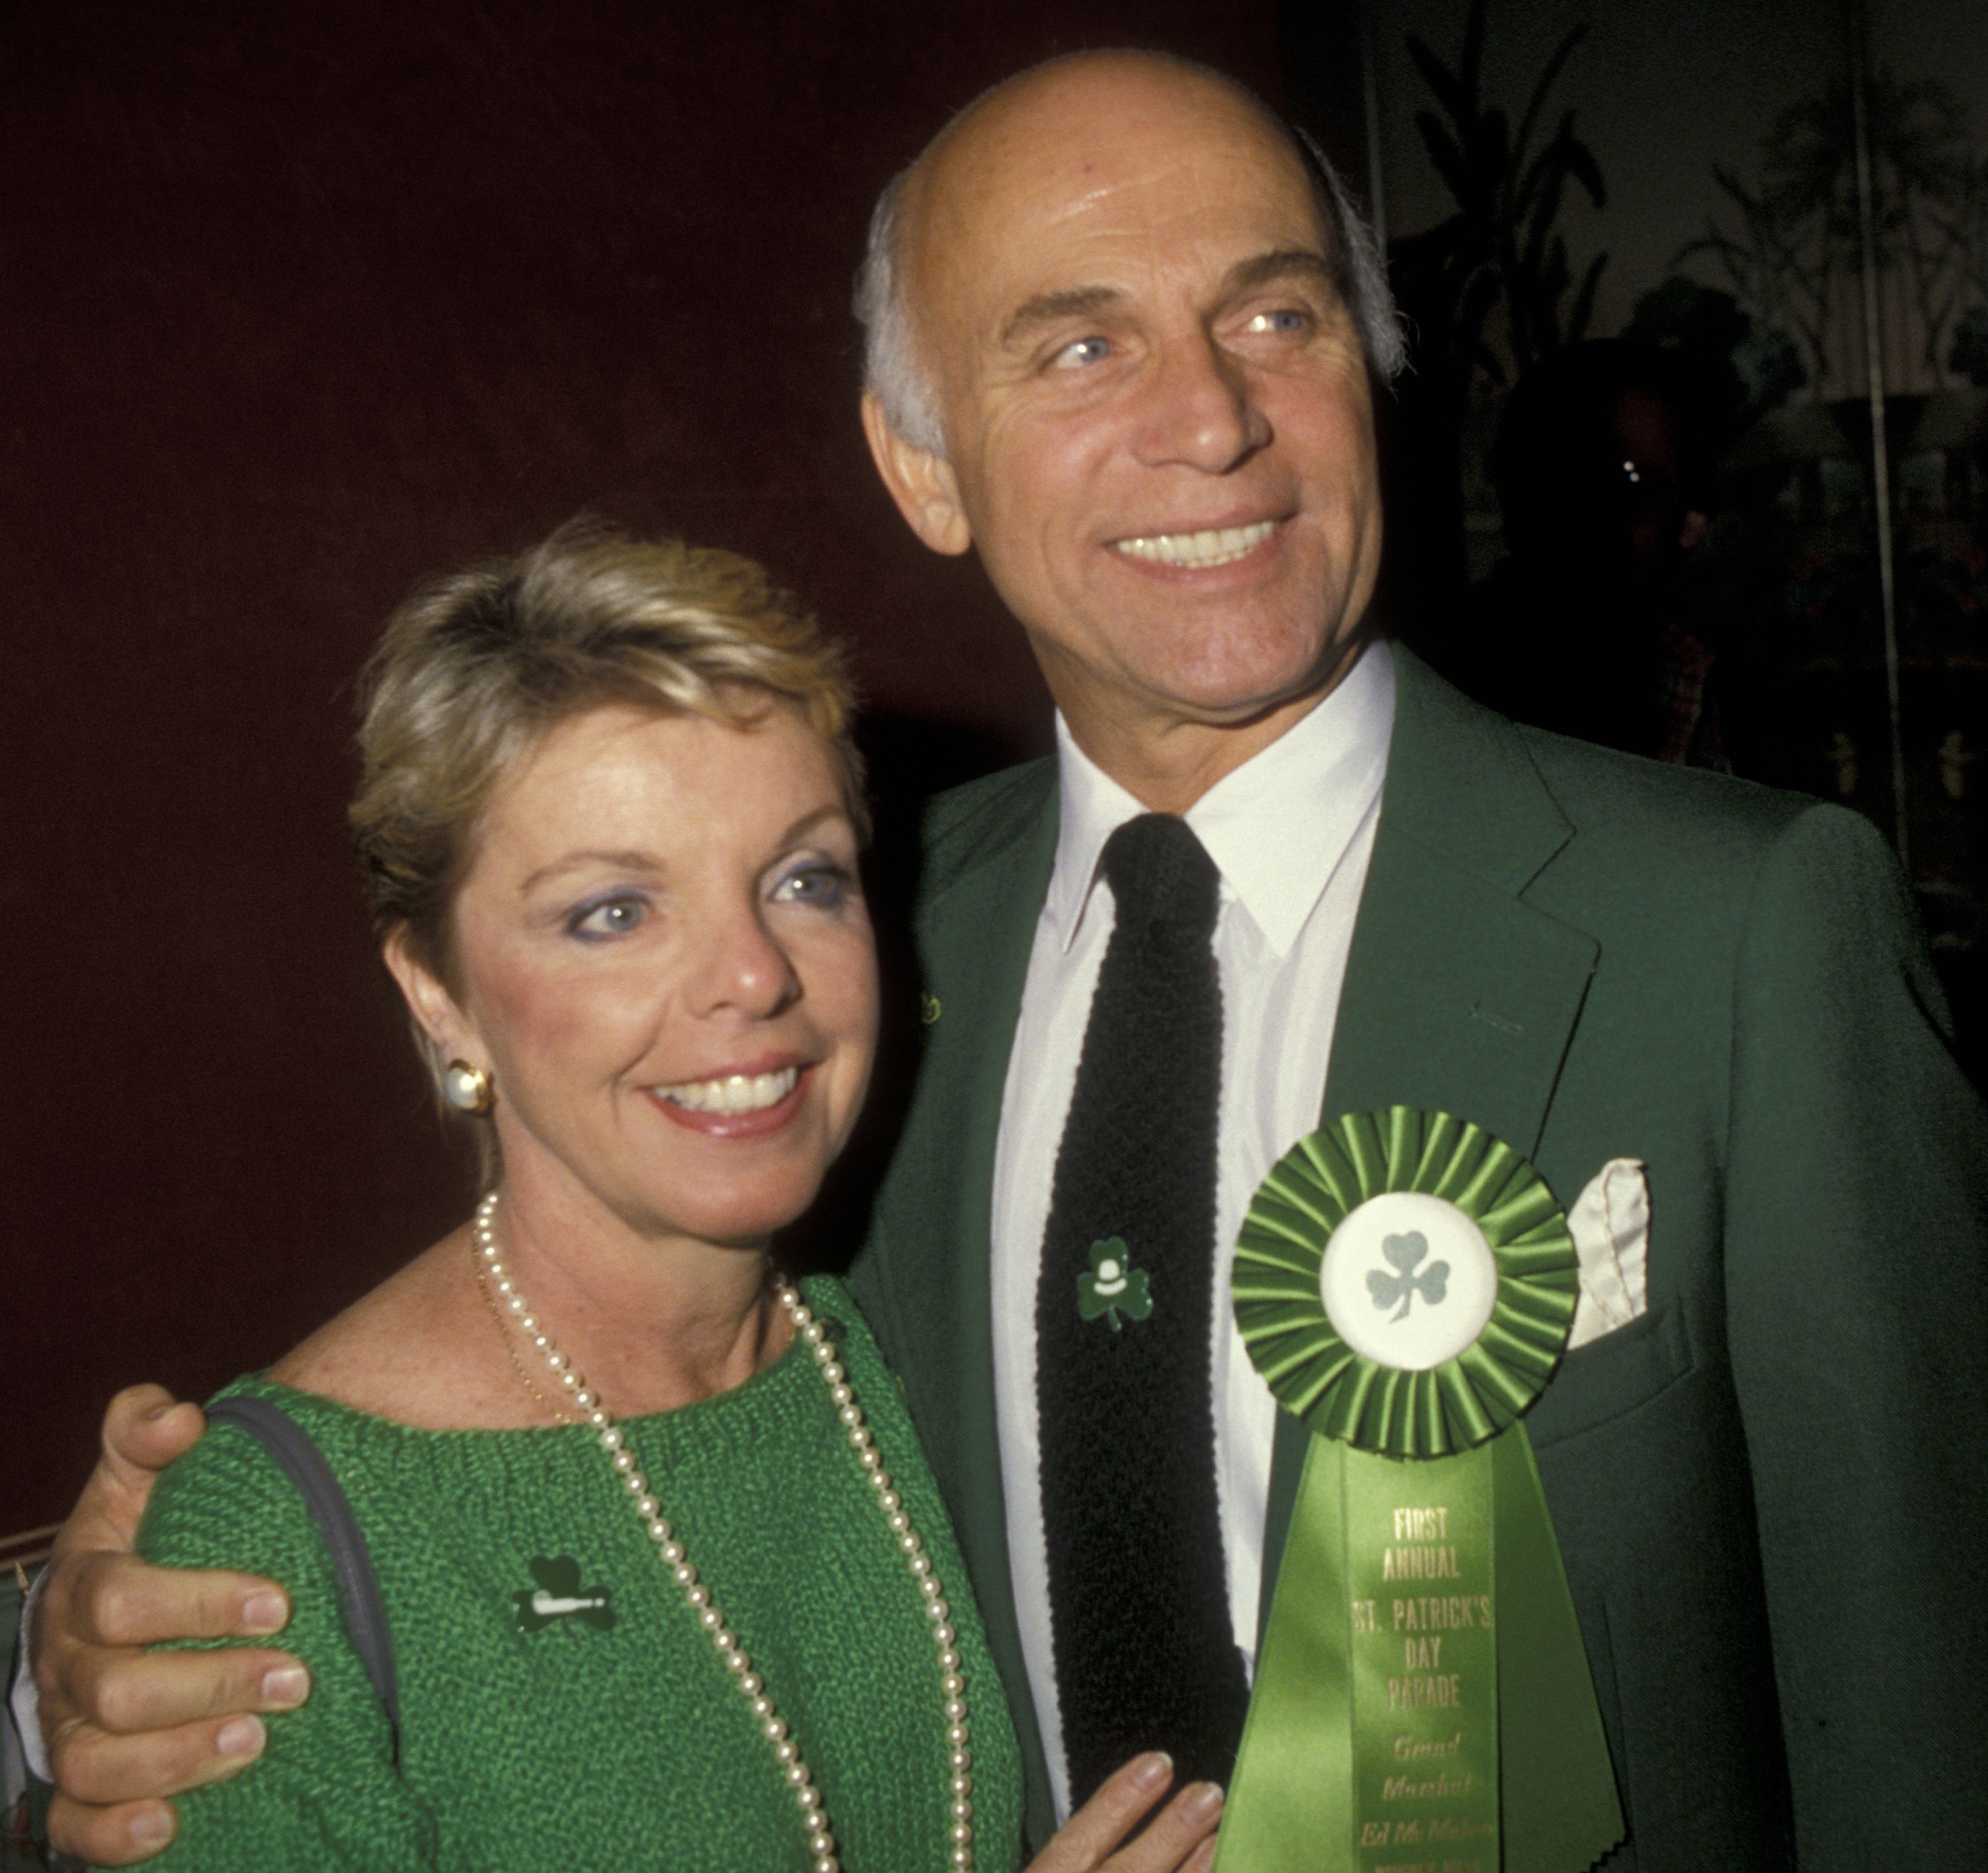 r Gavin MacLeod and wife Patti MacLeod at the First Annual St. Patrick's Day Parade in Beverly Hills in1985 | Source: Getty Images